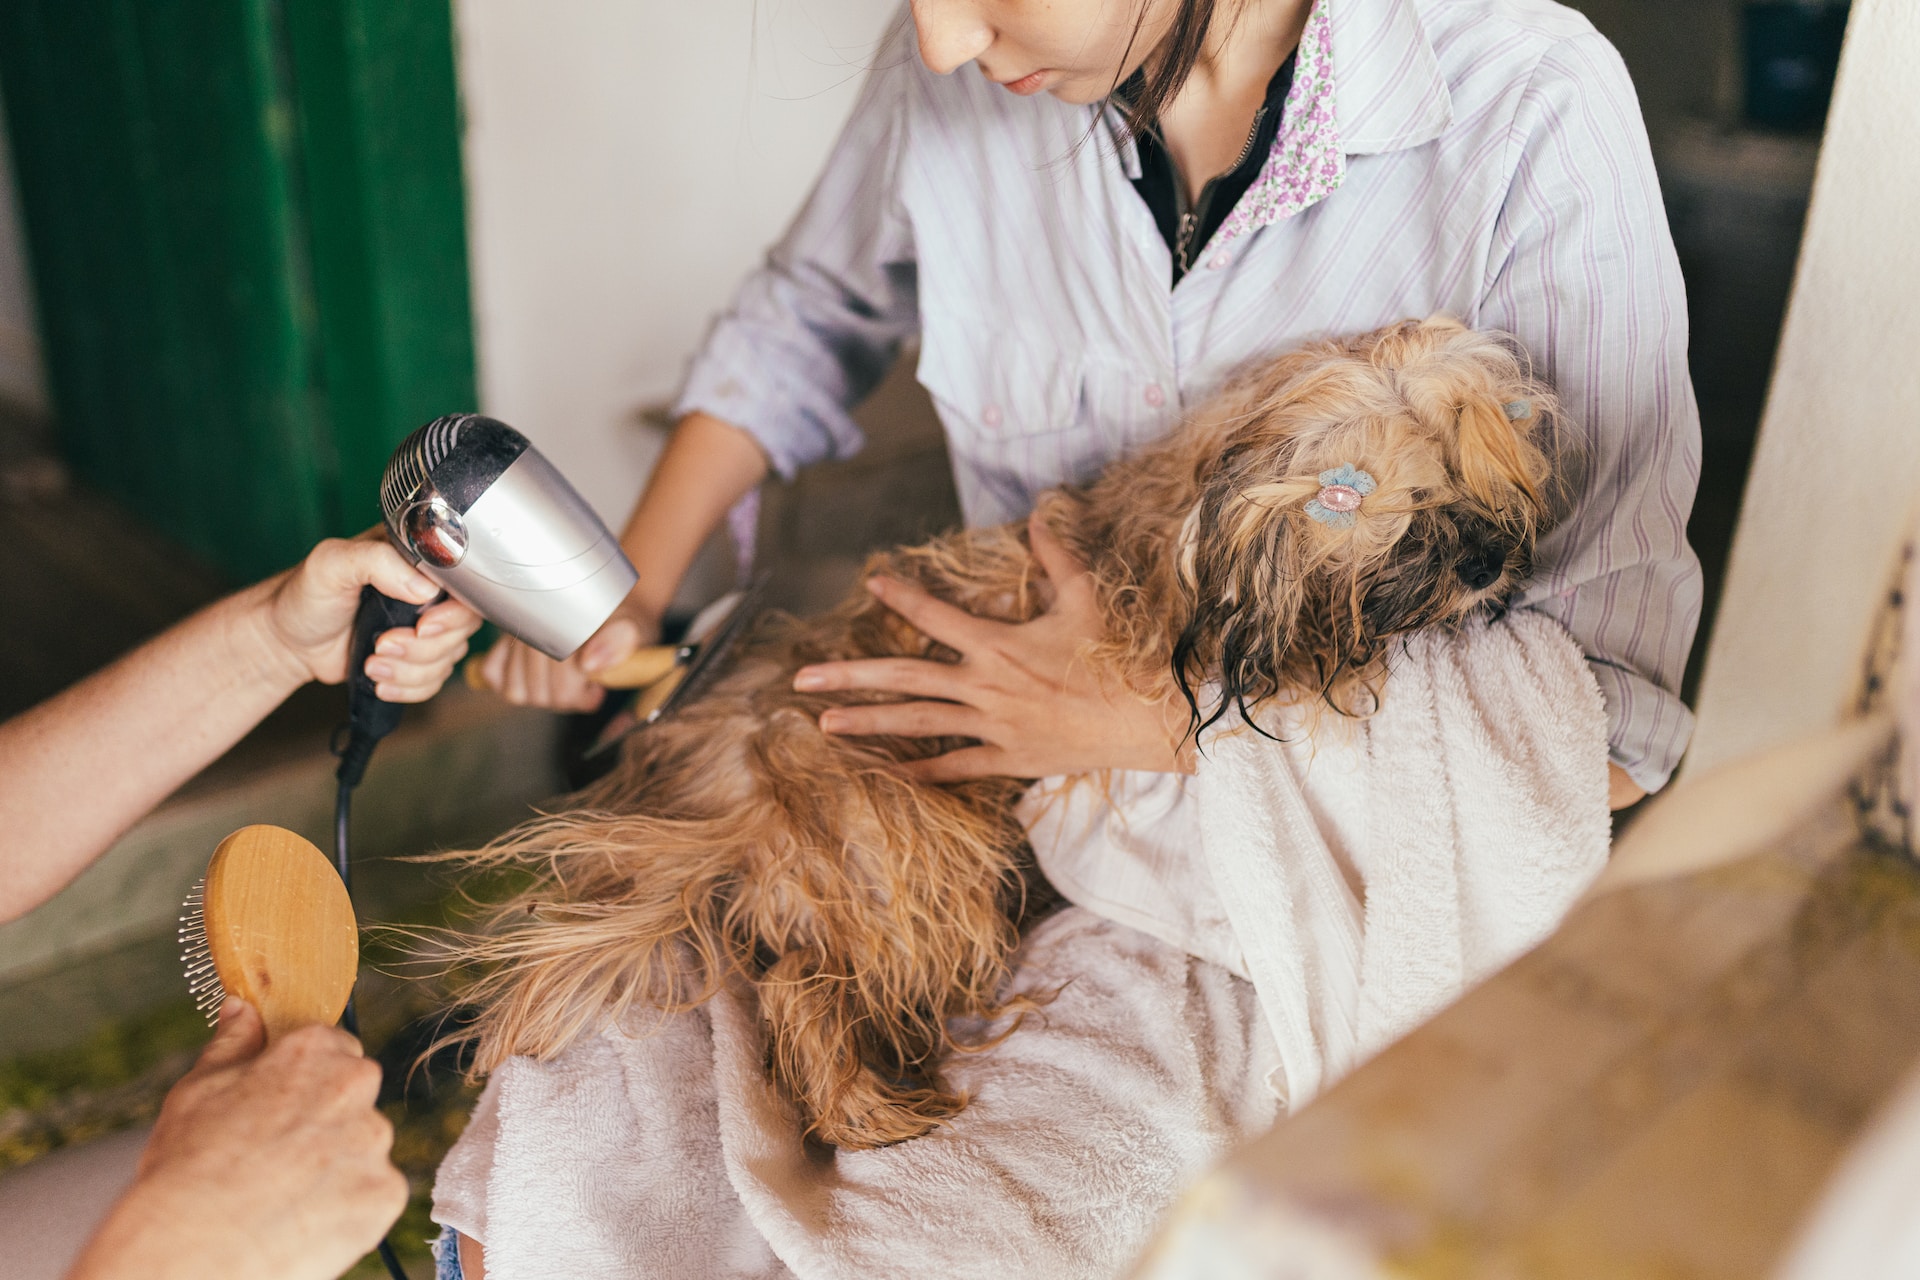 A dog being blow dried at a salon